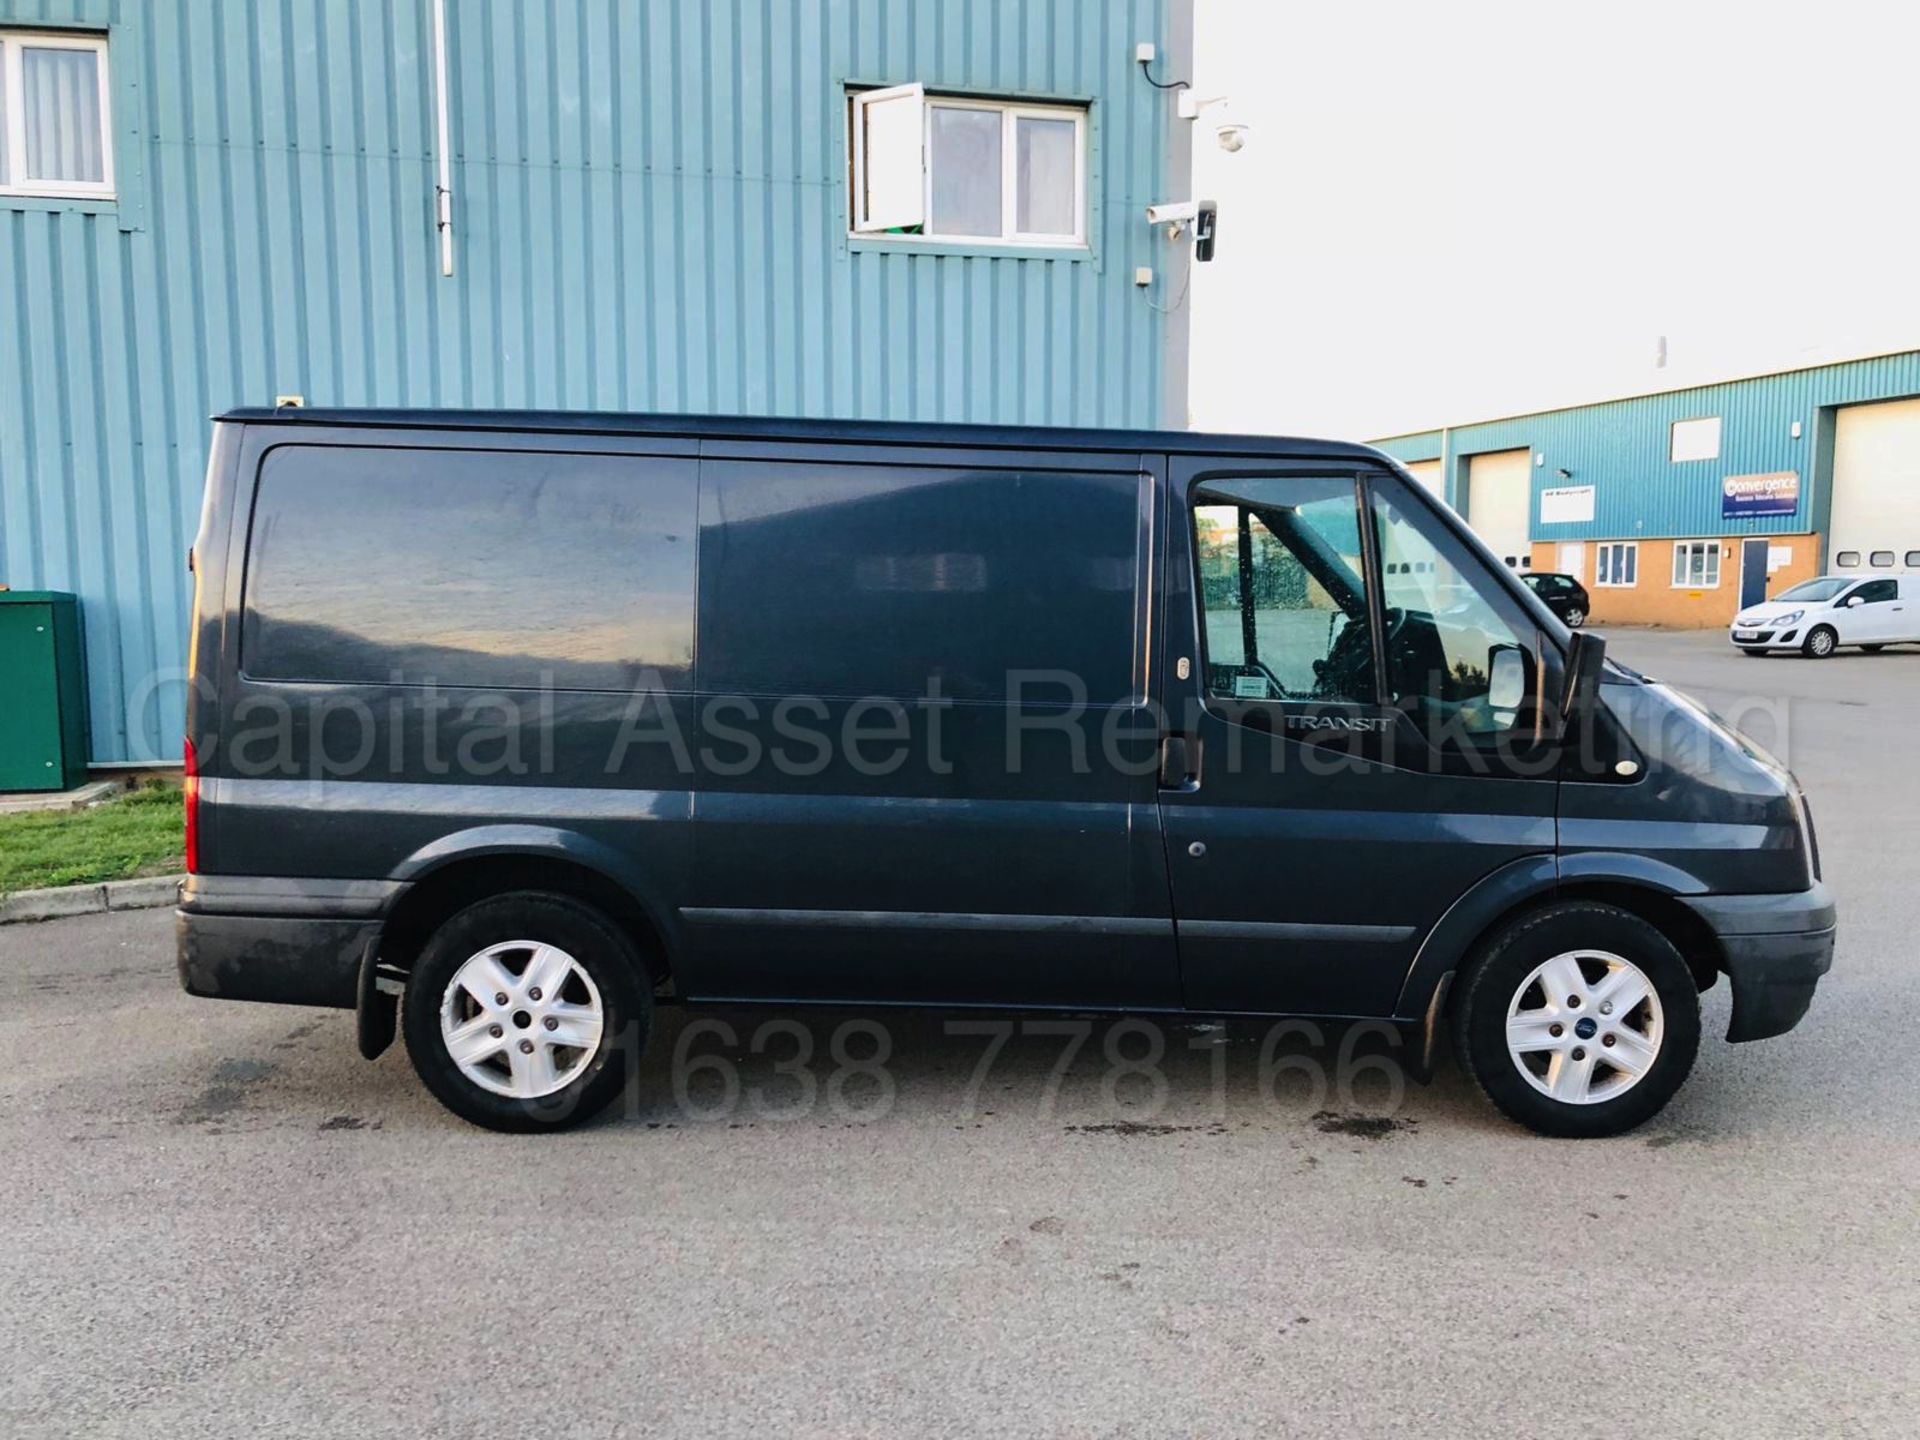 FORD TRANSIT 115 T260S *LIMITED EDITION* (2011 MODEL) '2.2 TDCI - 115 BHP - 6 SPEED' **AIR CON** - Image 14 of 34